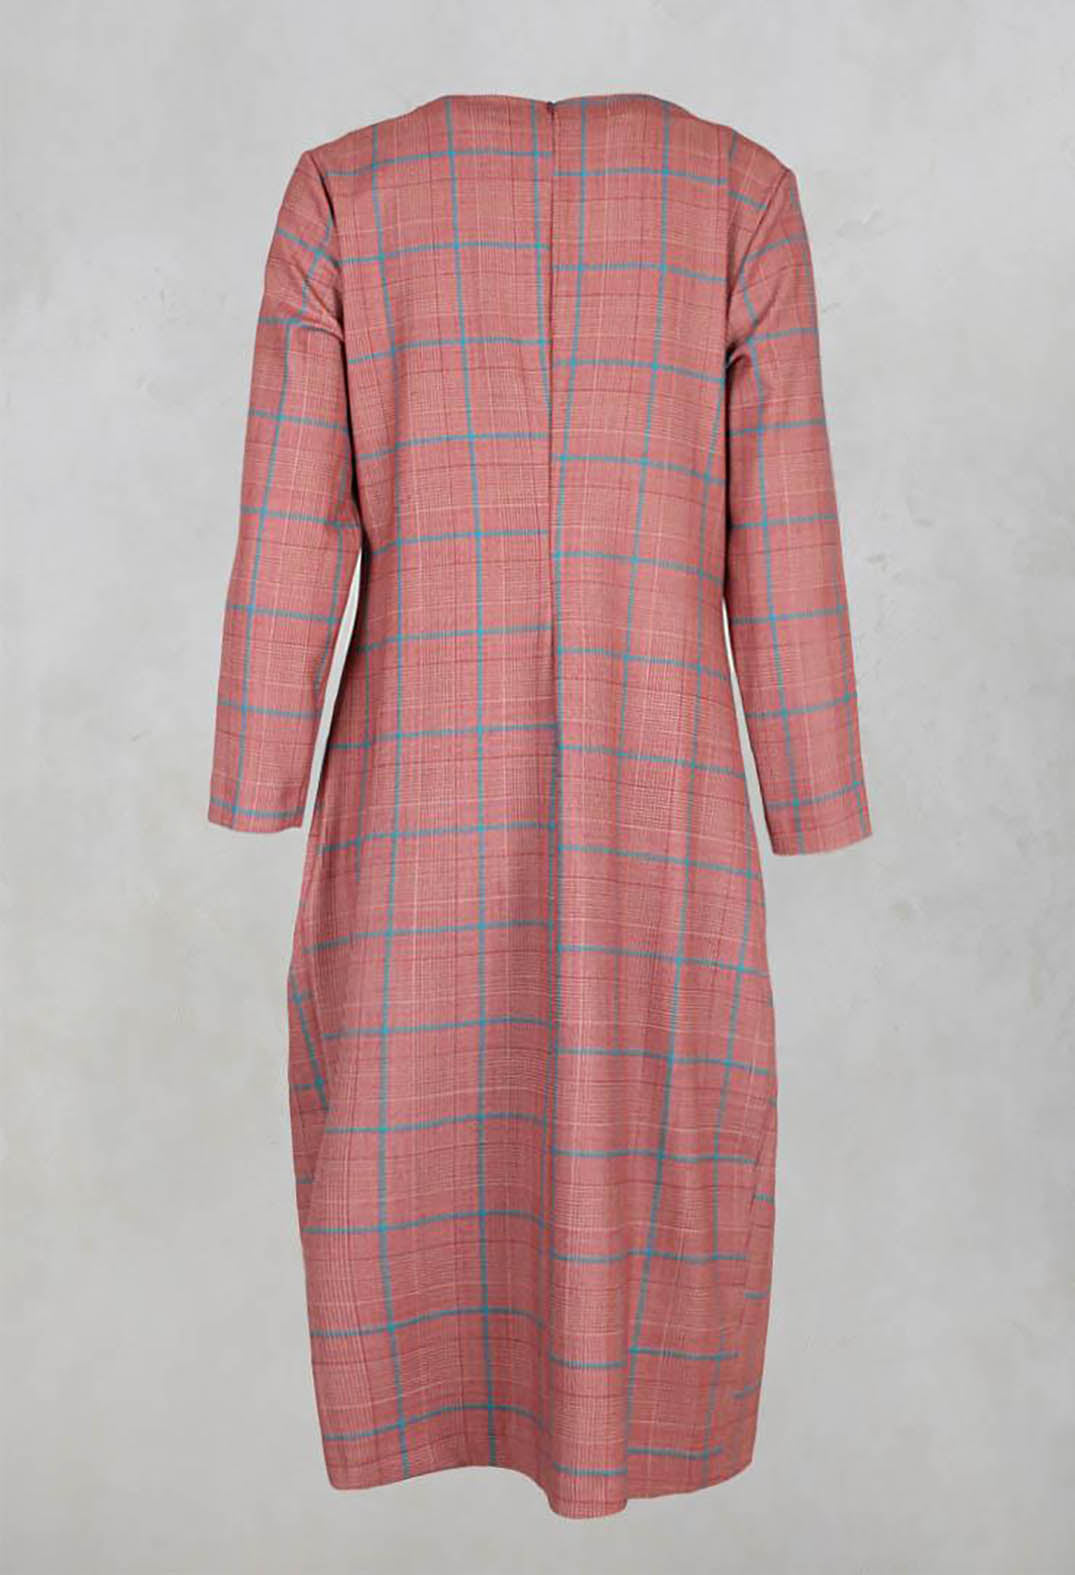 Checked Shift Style Trapeze Dress with Pockets in Ruby Red